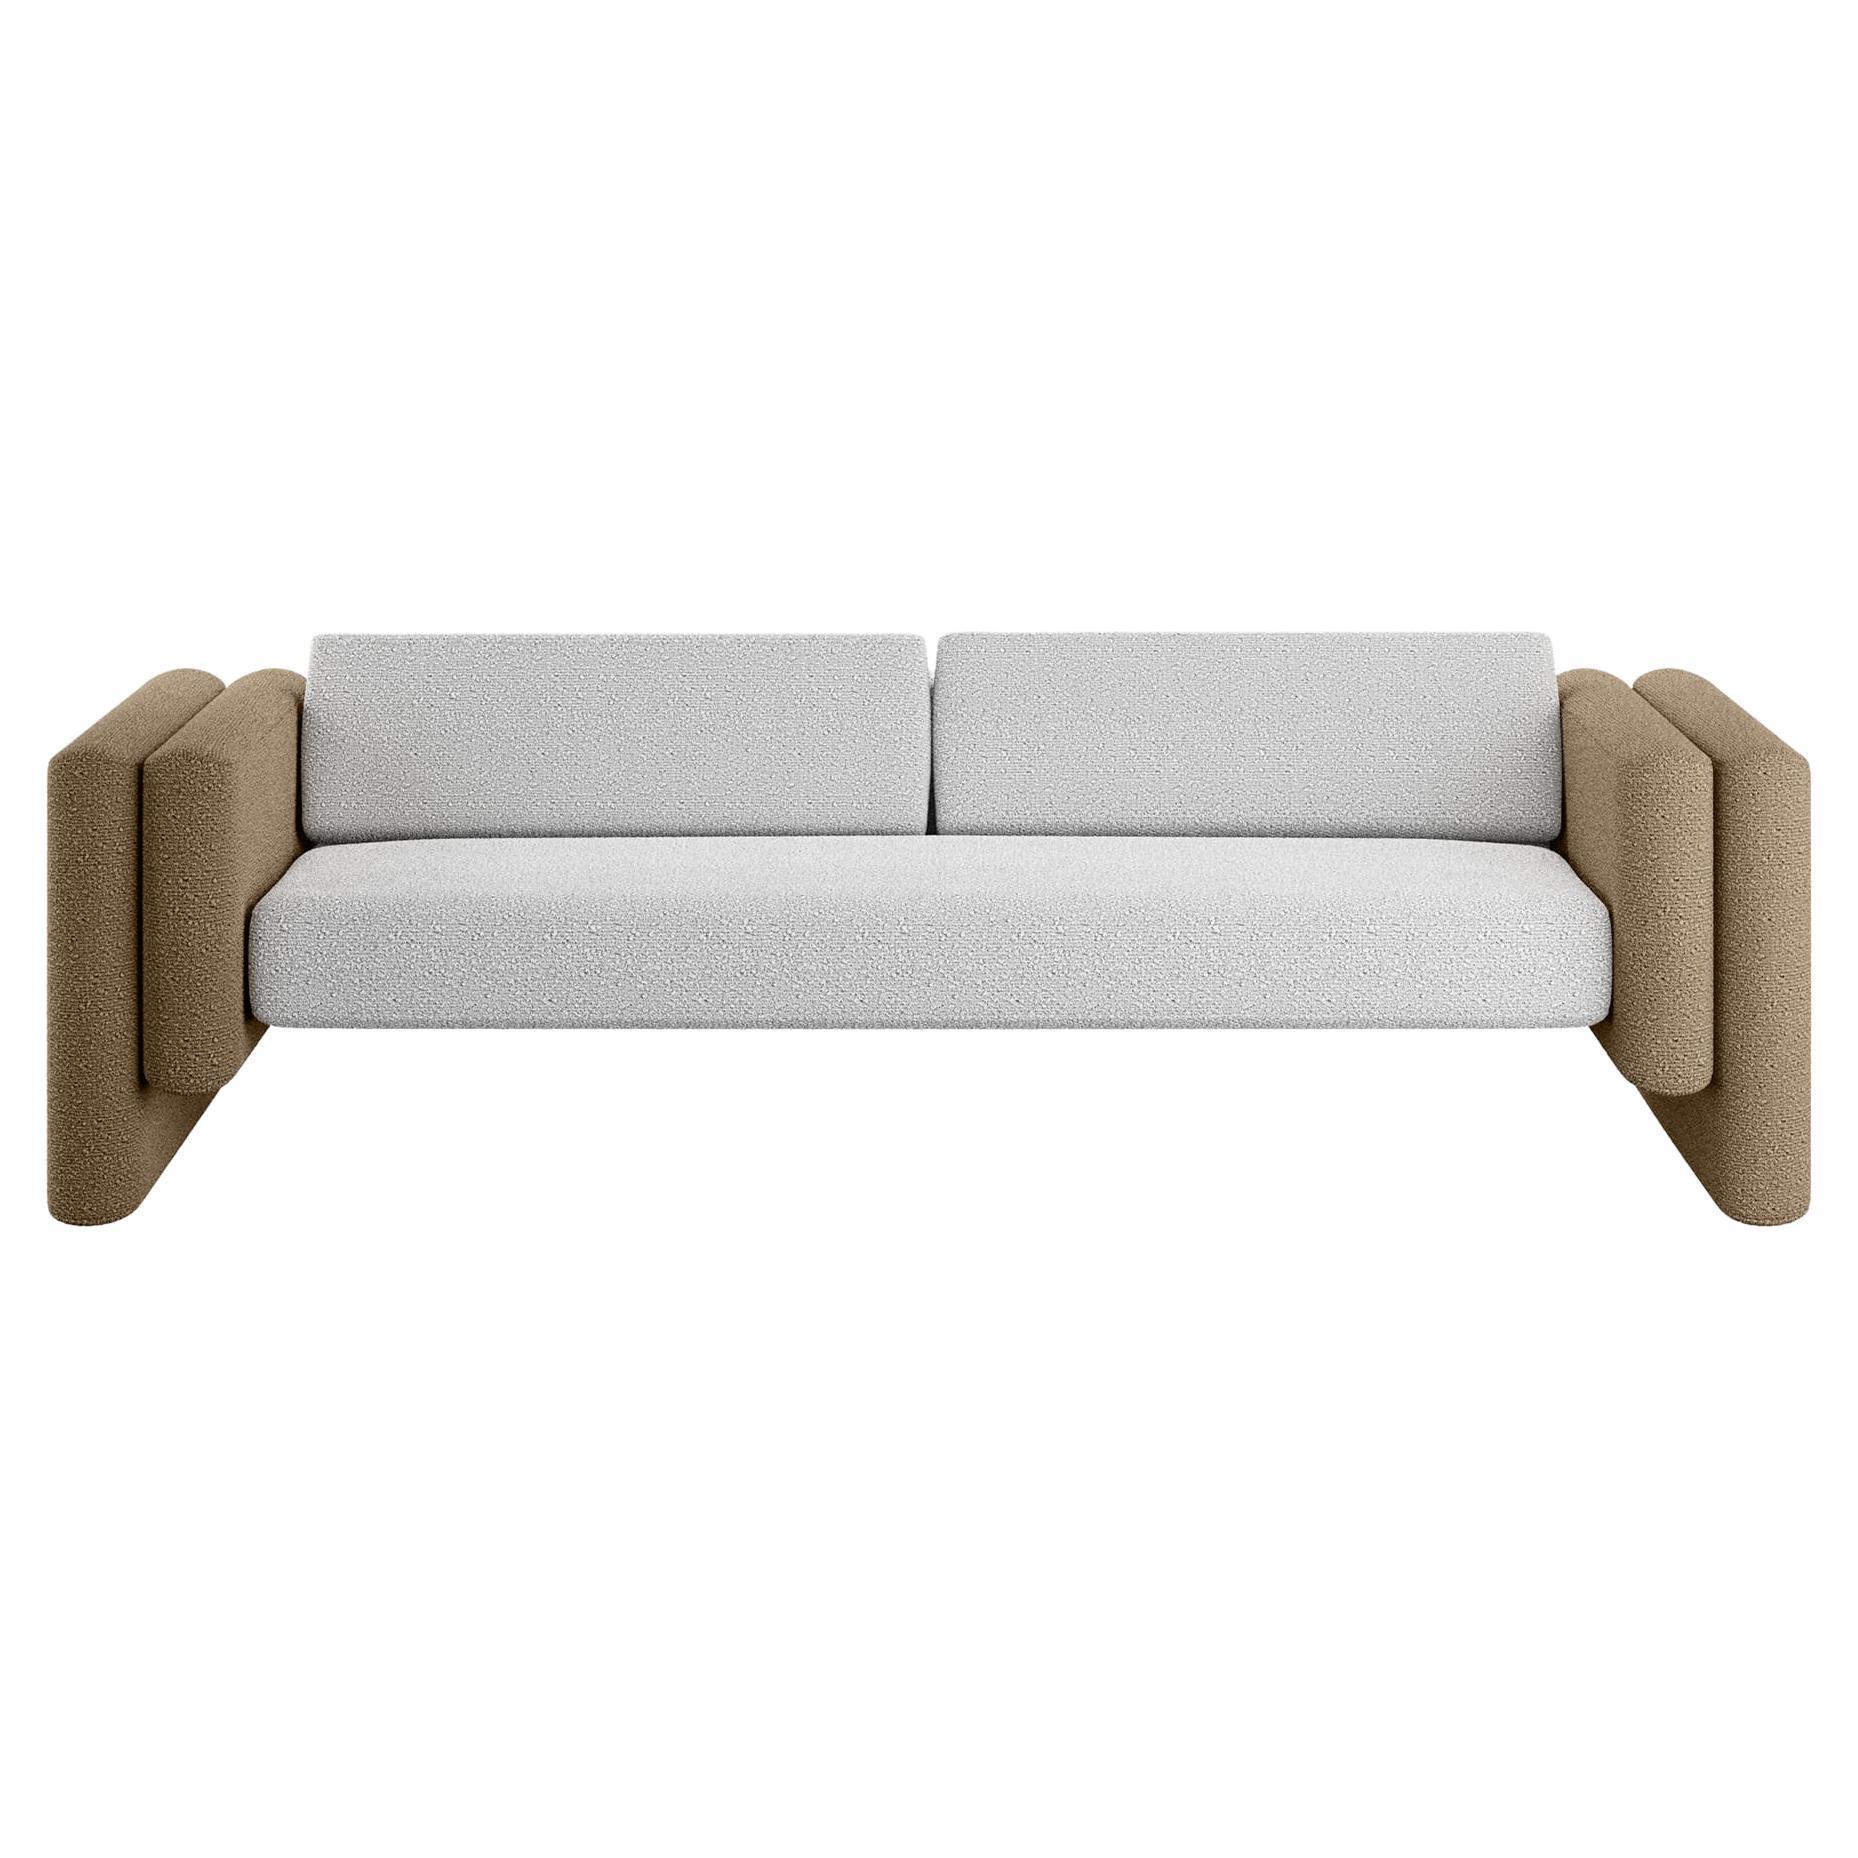 Contemporary Indoor Outdoor Sofa in Beige, Khaki & White Outdoor Fabric For Sale